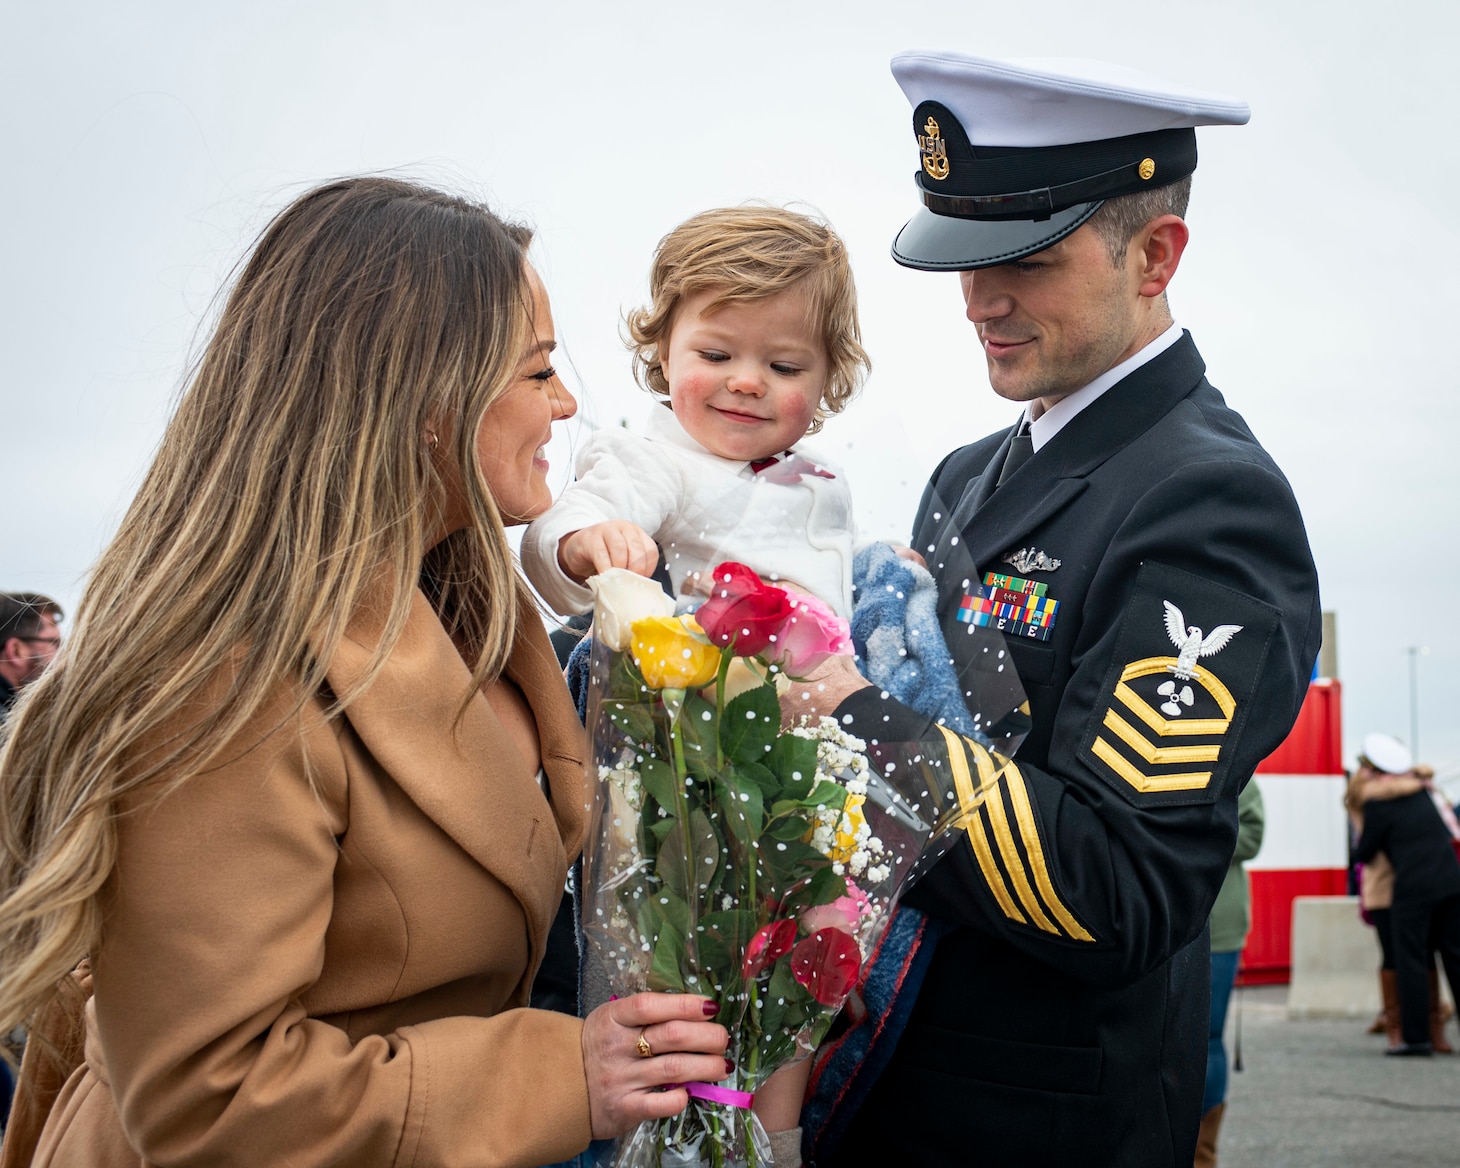 Chief Machinist’s Mate (Nuclear) Ryan O’Neill, assigned to the Virginia-Class fast-attack submarine USS Washington (SSN 787), embraces his son, Silas, and wife, Heather, during the boat’s homecoming at Naval Station Norfolk , Feb. 27, 2022.